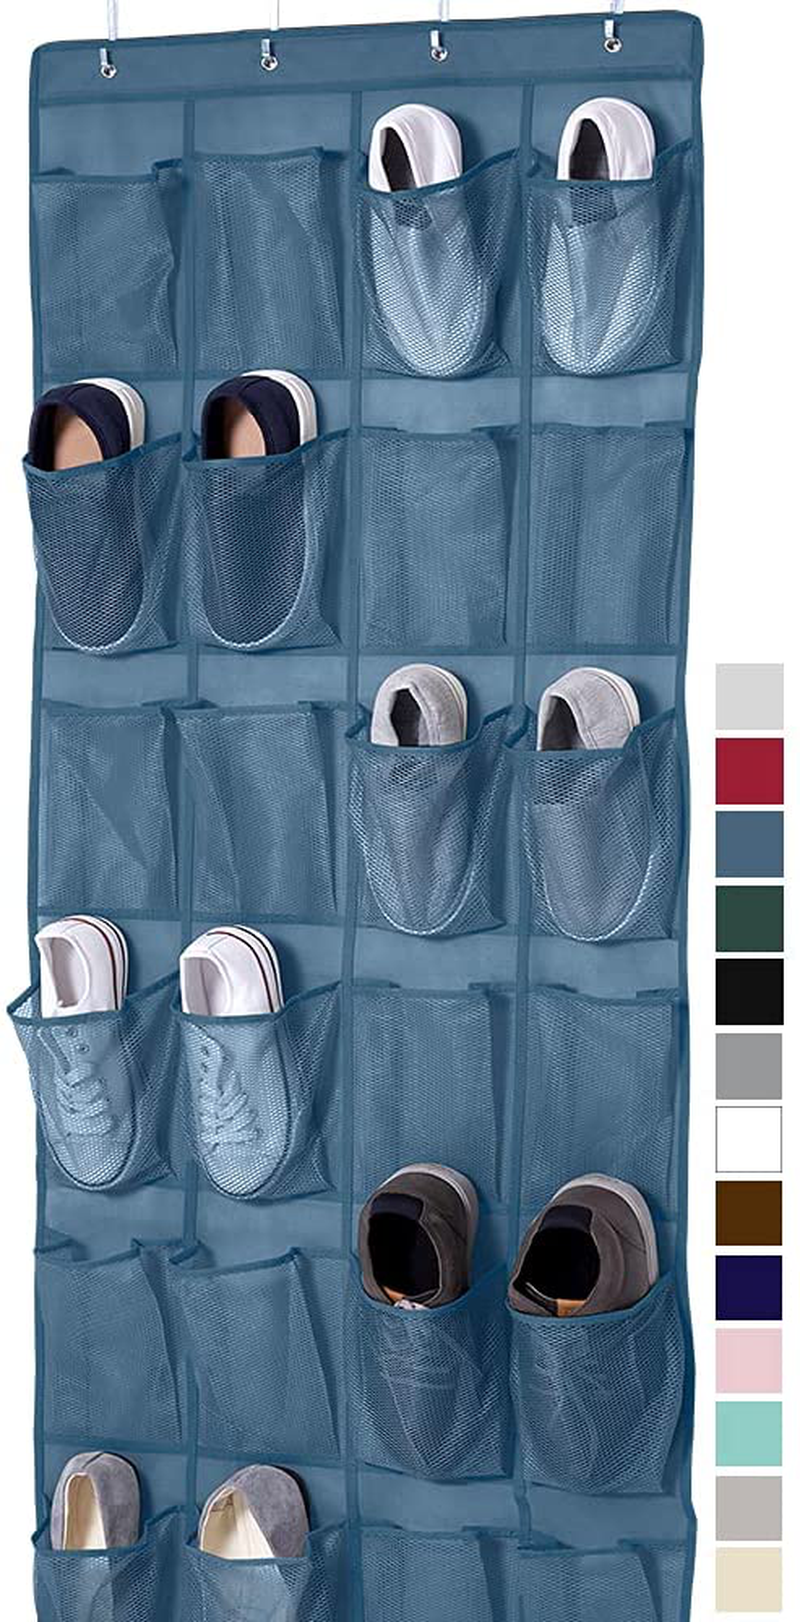 Gorilla Grip Large 24 Pocket Shoe Organizer, Breathable Mesh, Holds up to 40 Pounds, Sturdy Hooks, Space Saving, over Door, Storage Rack Hangs on Closets for Shoes, Sneakers or Home Accessories, Blue